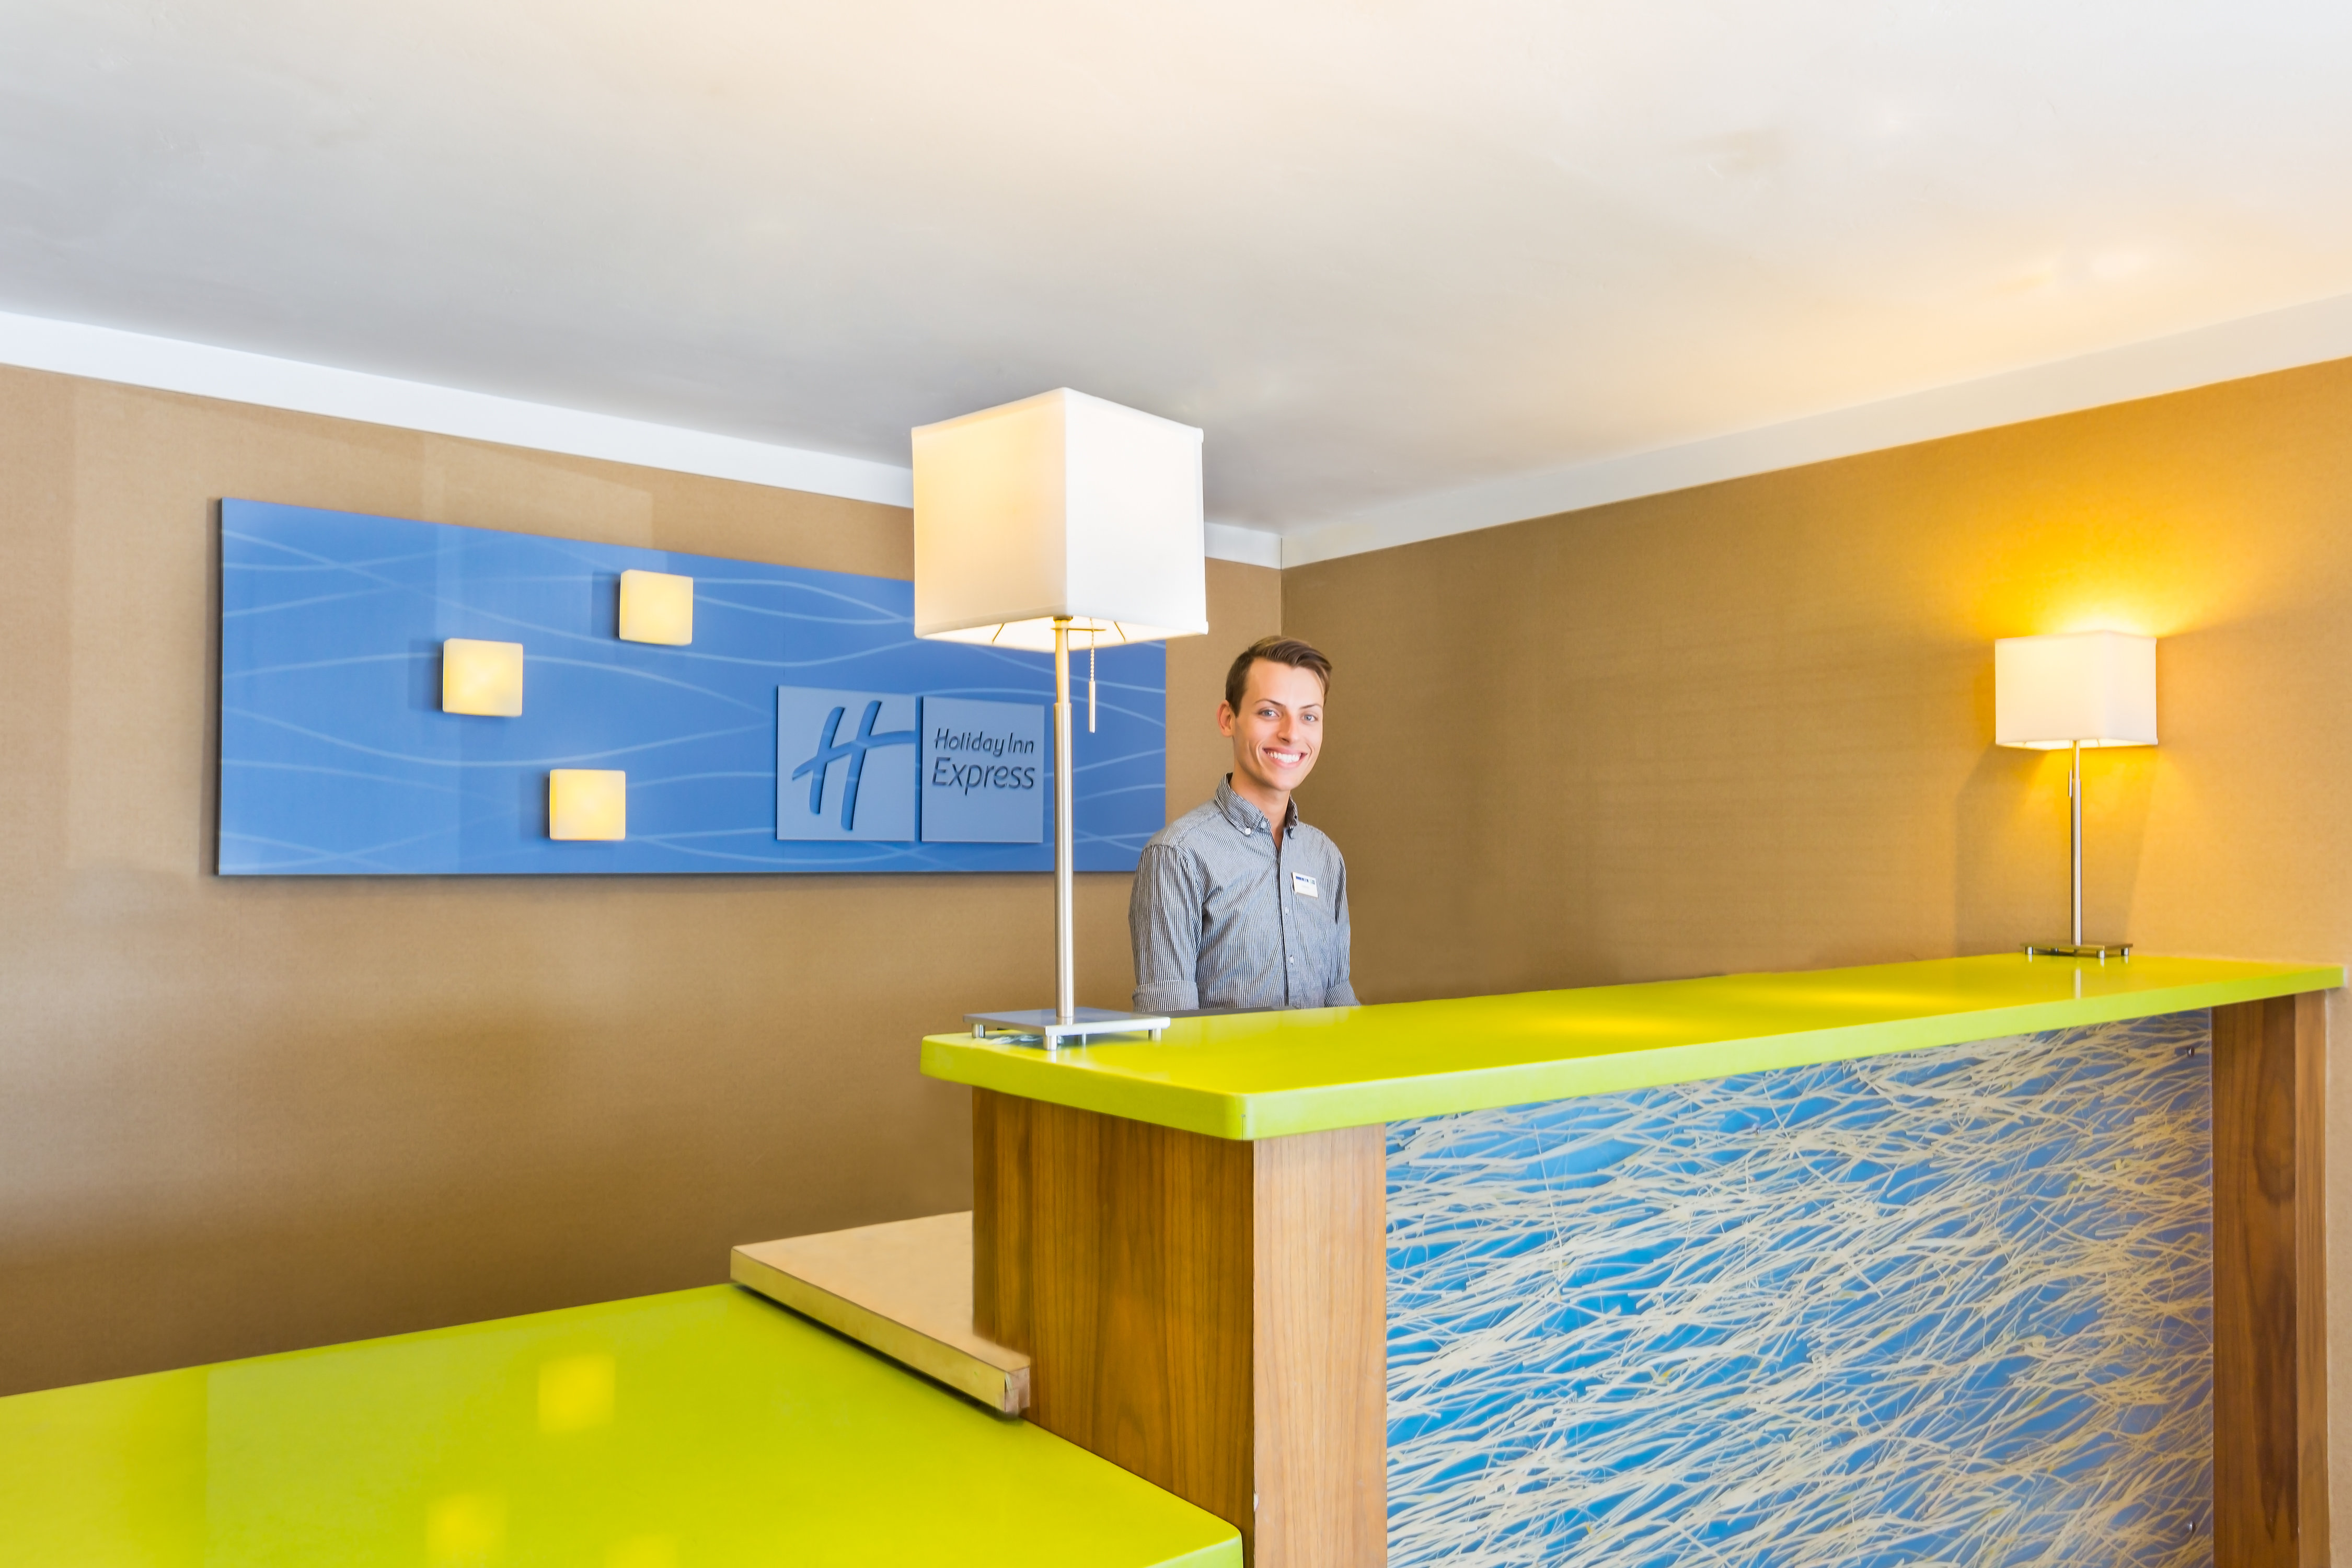 Our Mission Bay hotel staff look forward to your arrival.